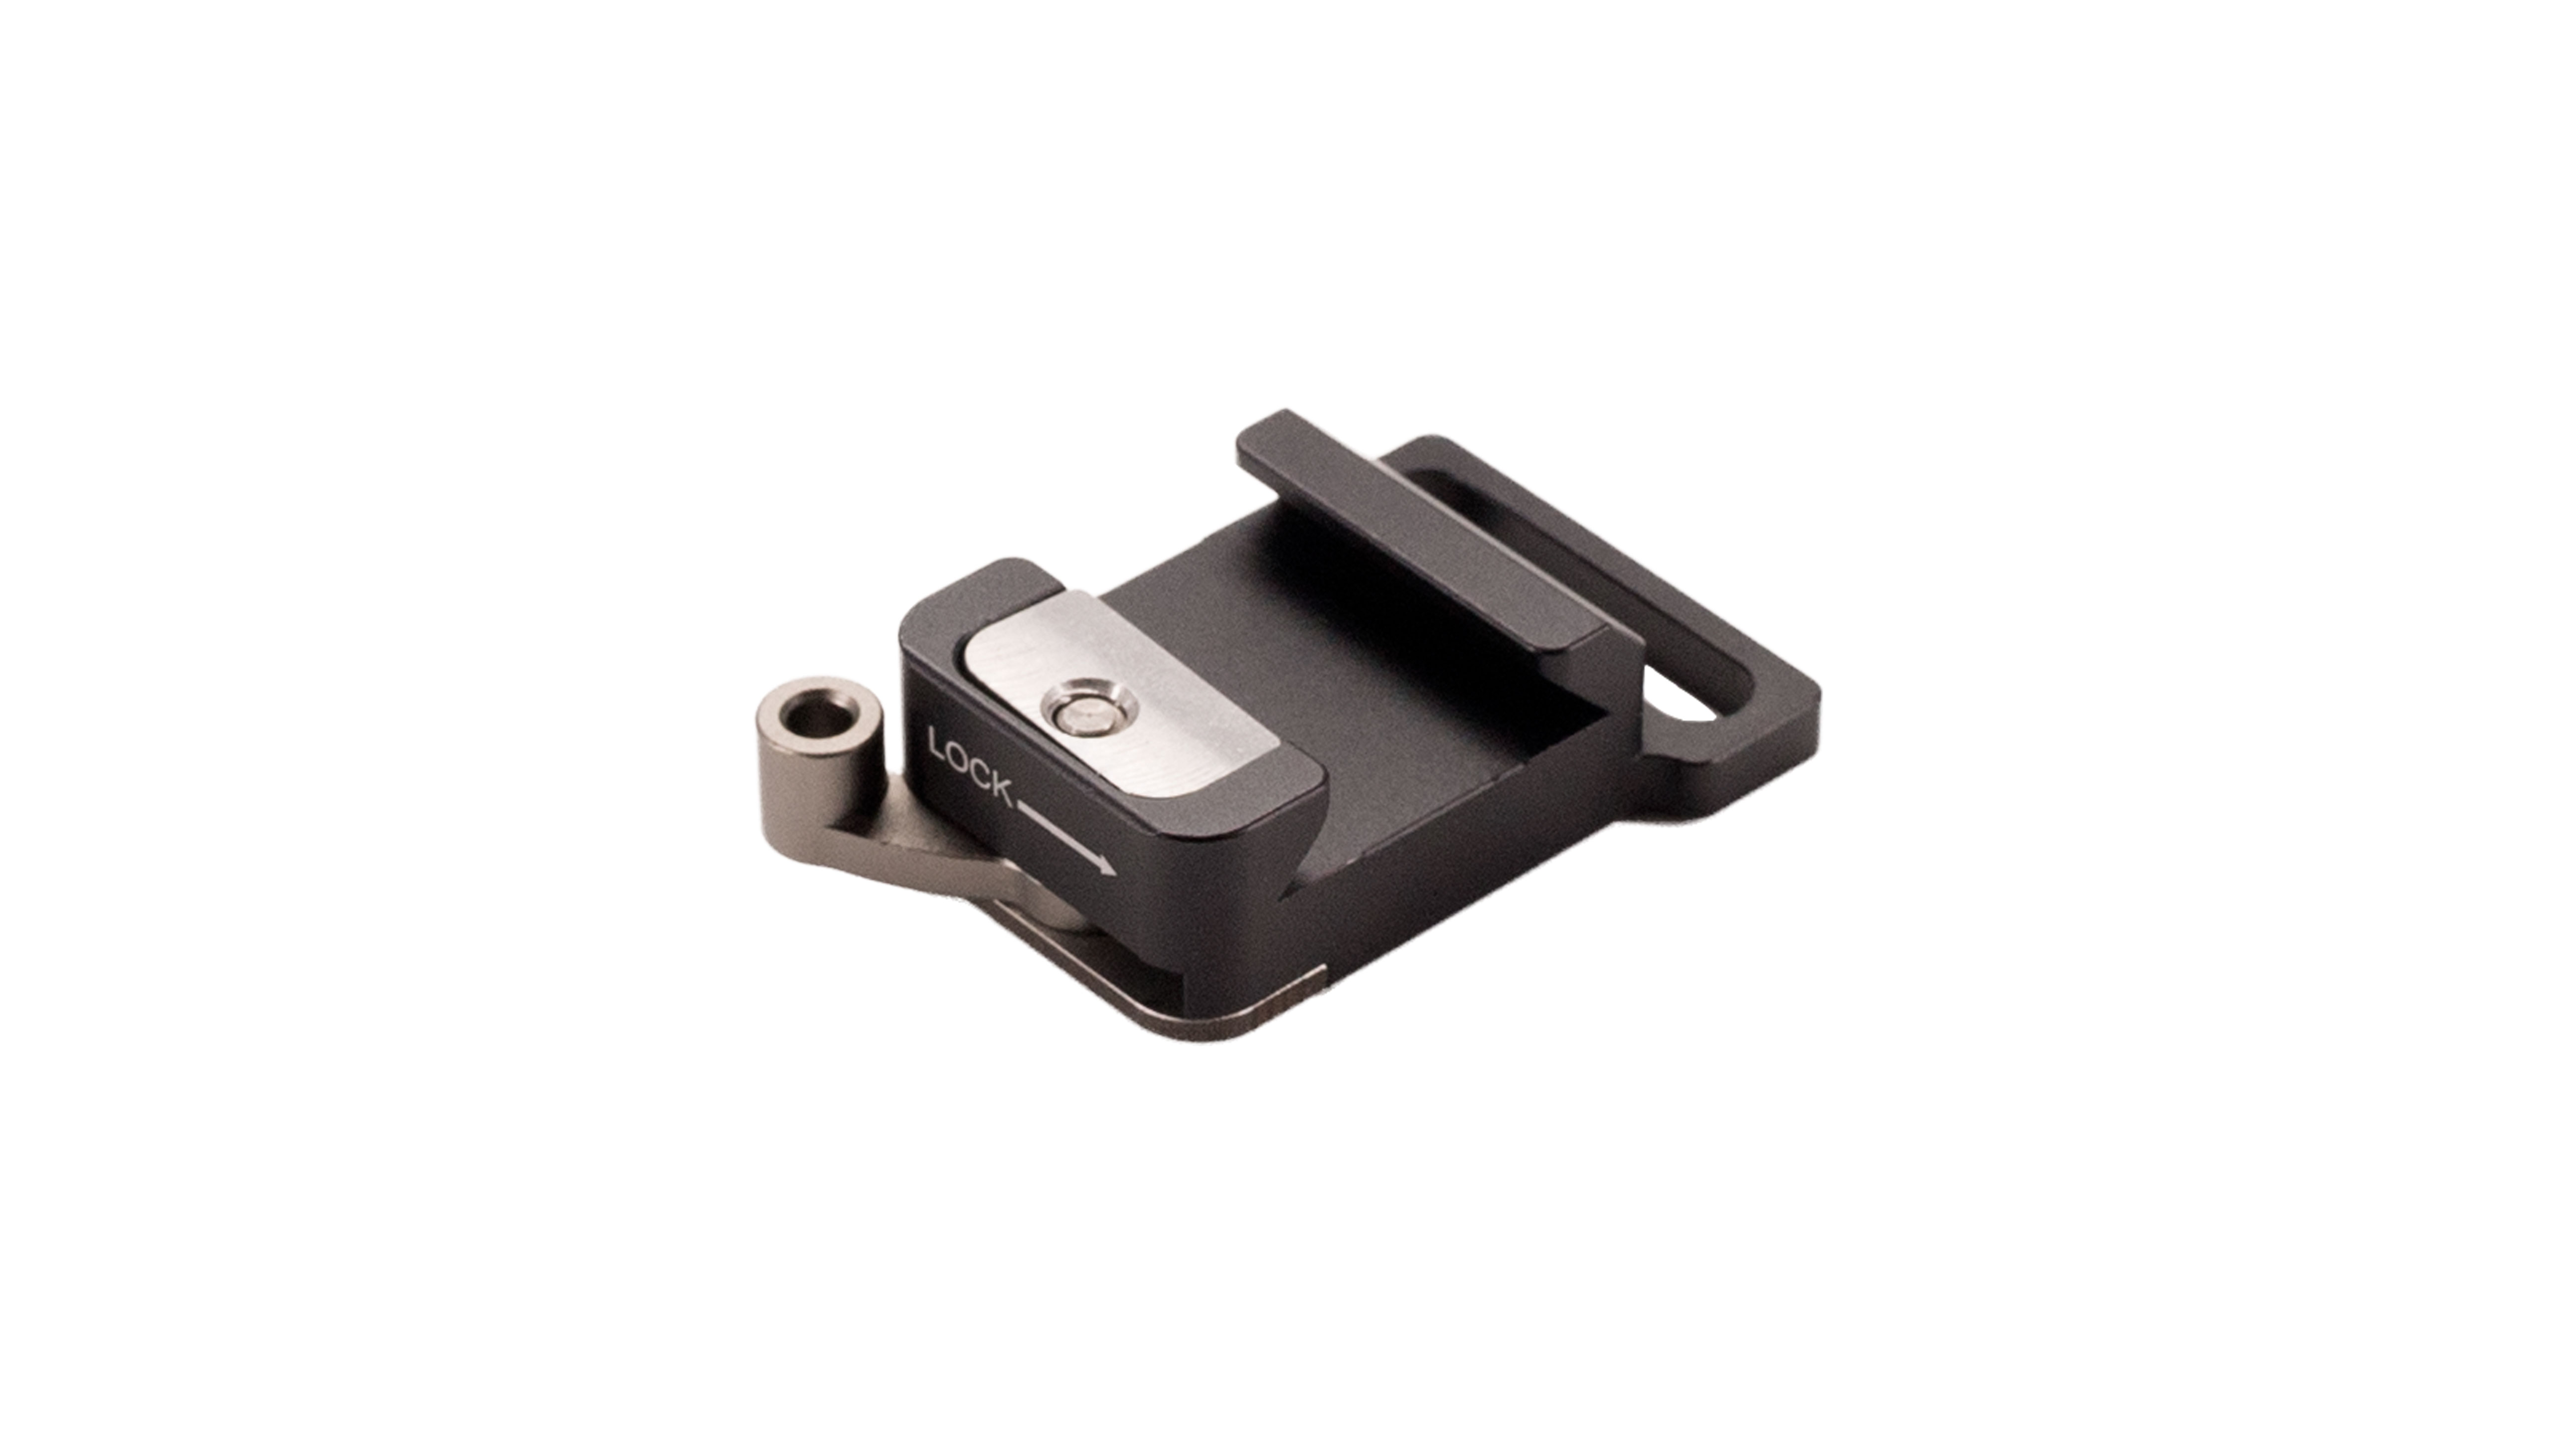 Gravity Mimic Transmitter Quick Release Mount (Discontinued)